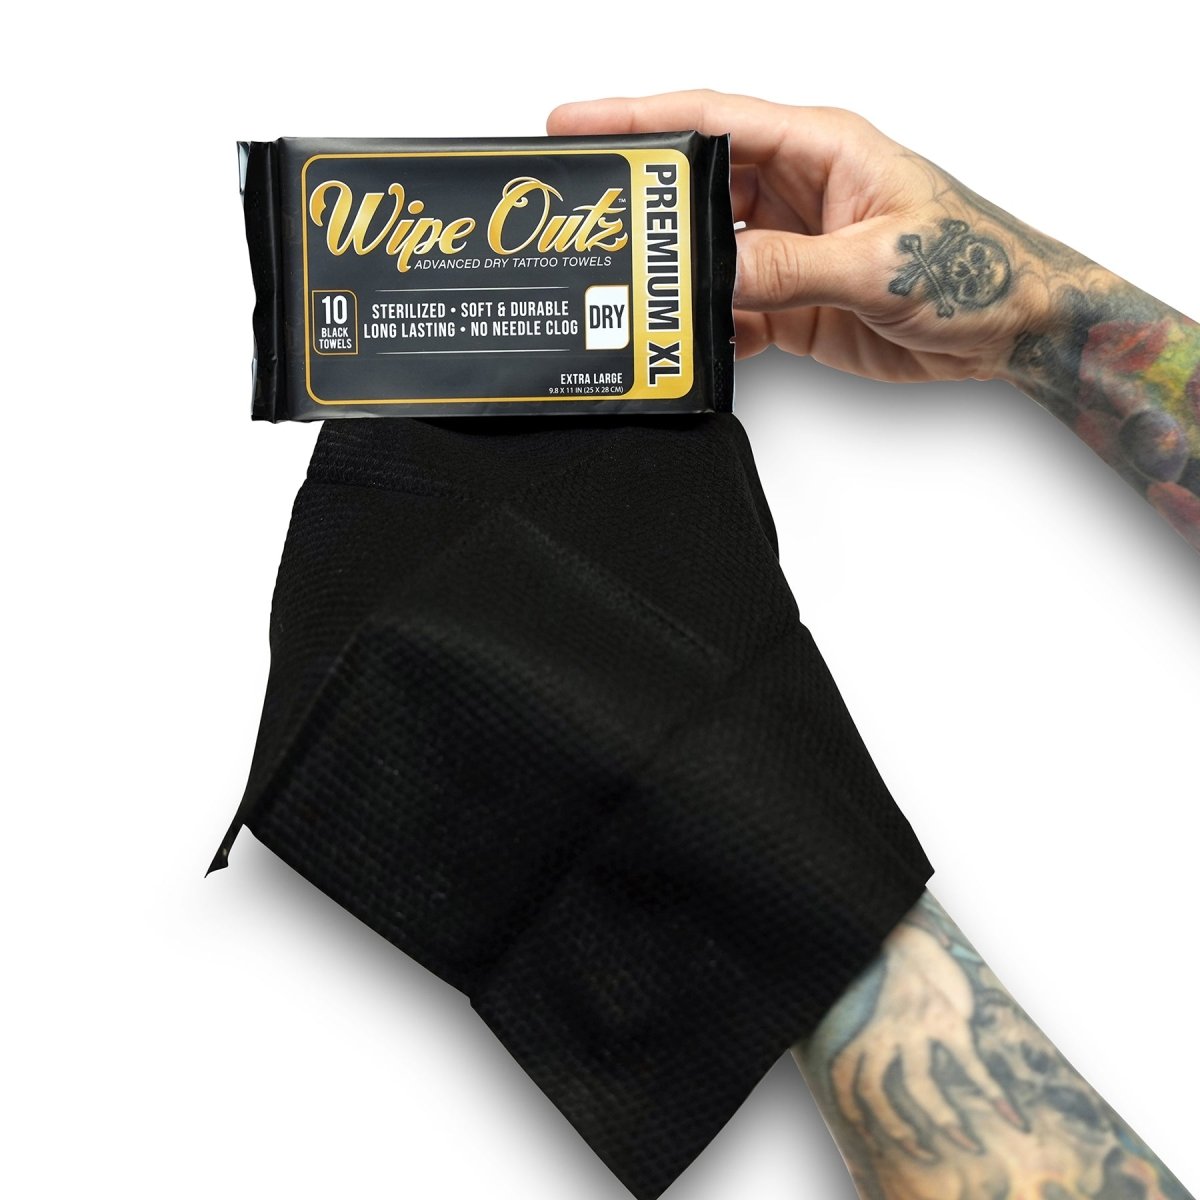 NEW Wipe Outz X Large Black Tattoo Towels (10 Count) PREORDER - MD Wipe Outz